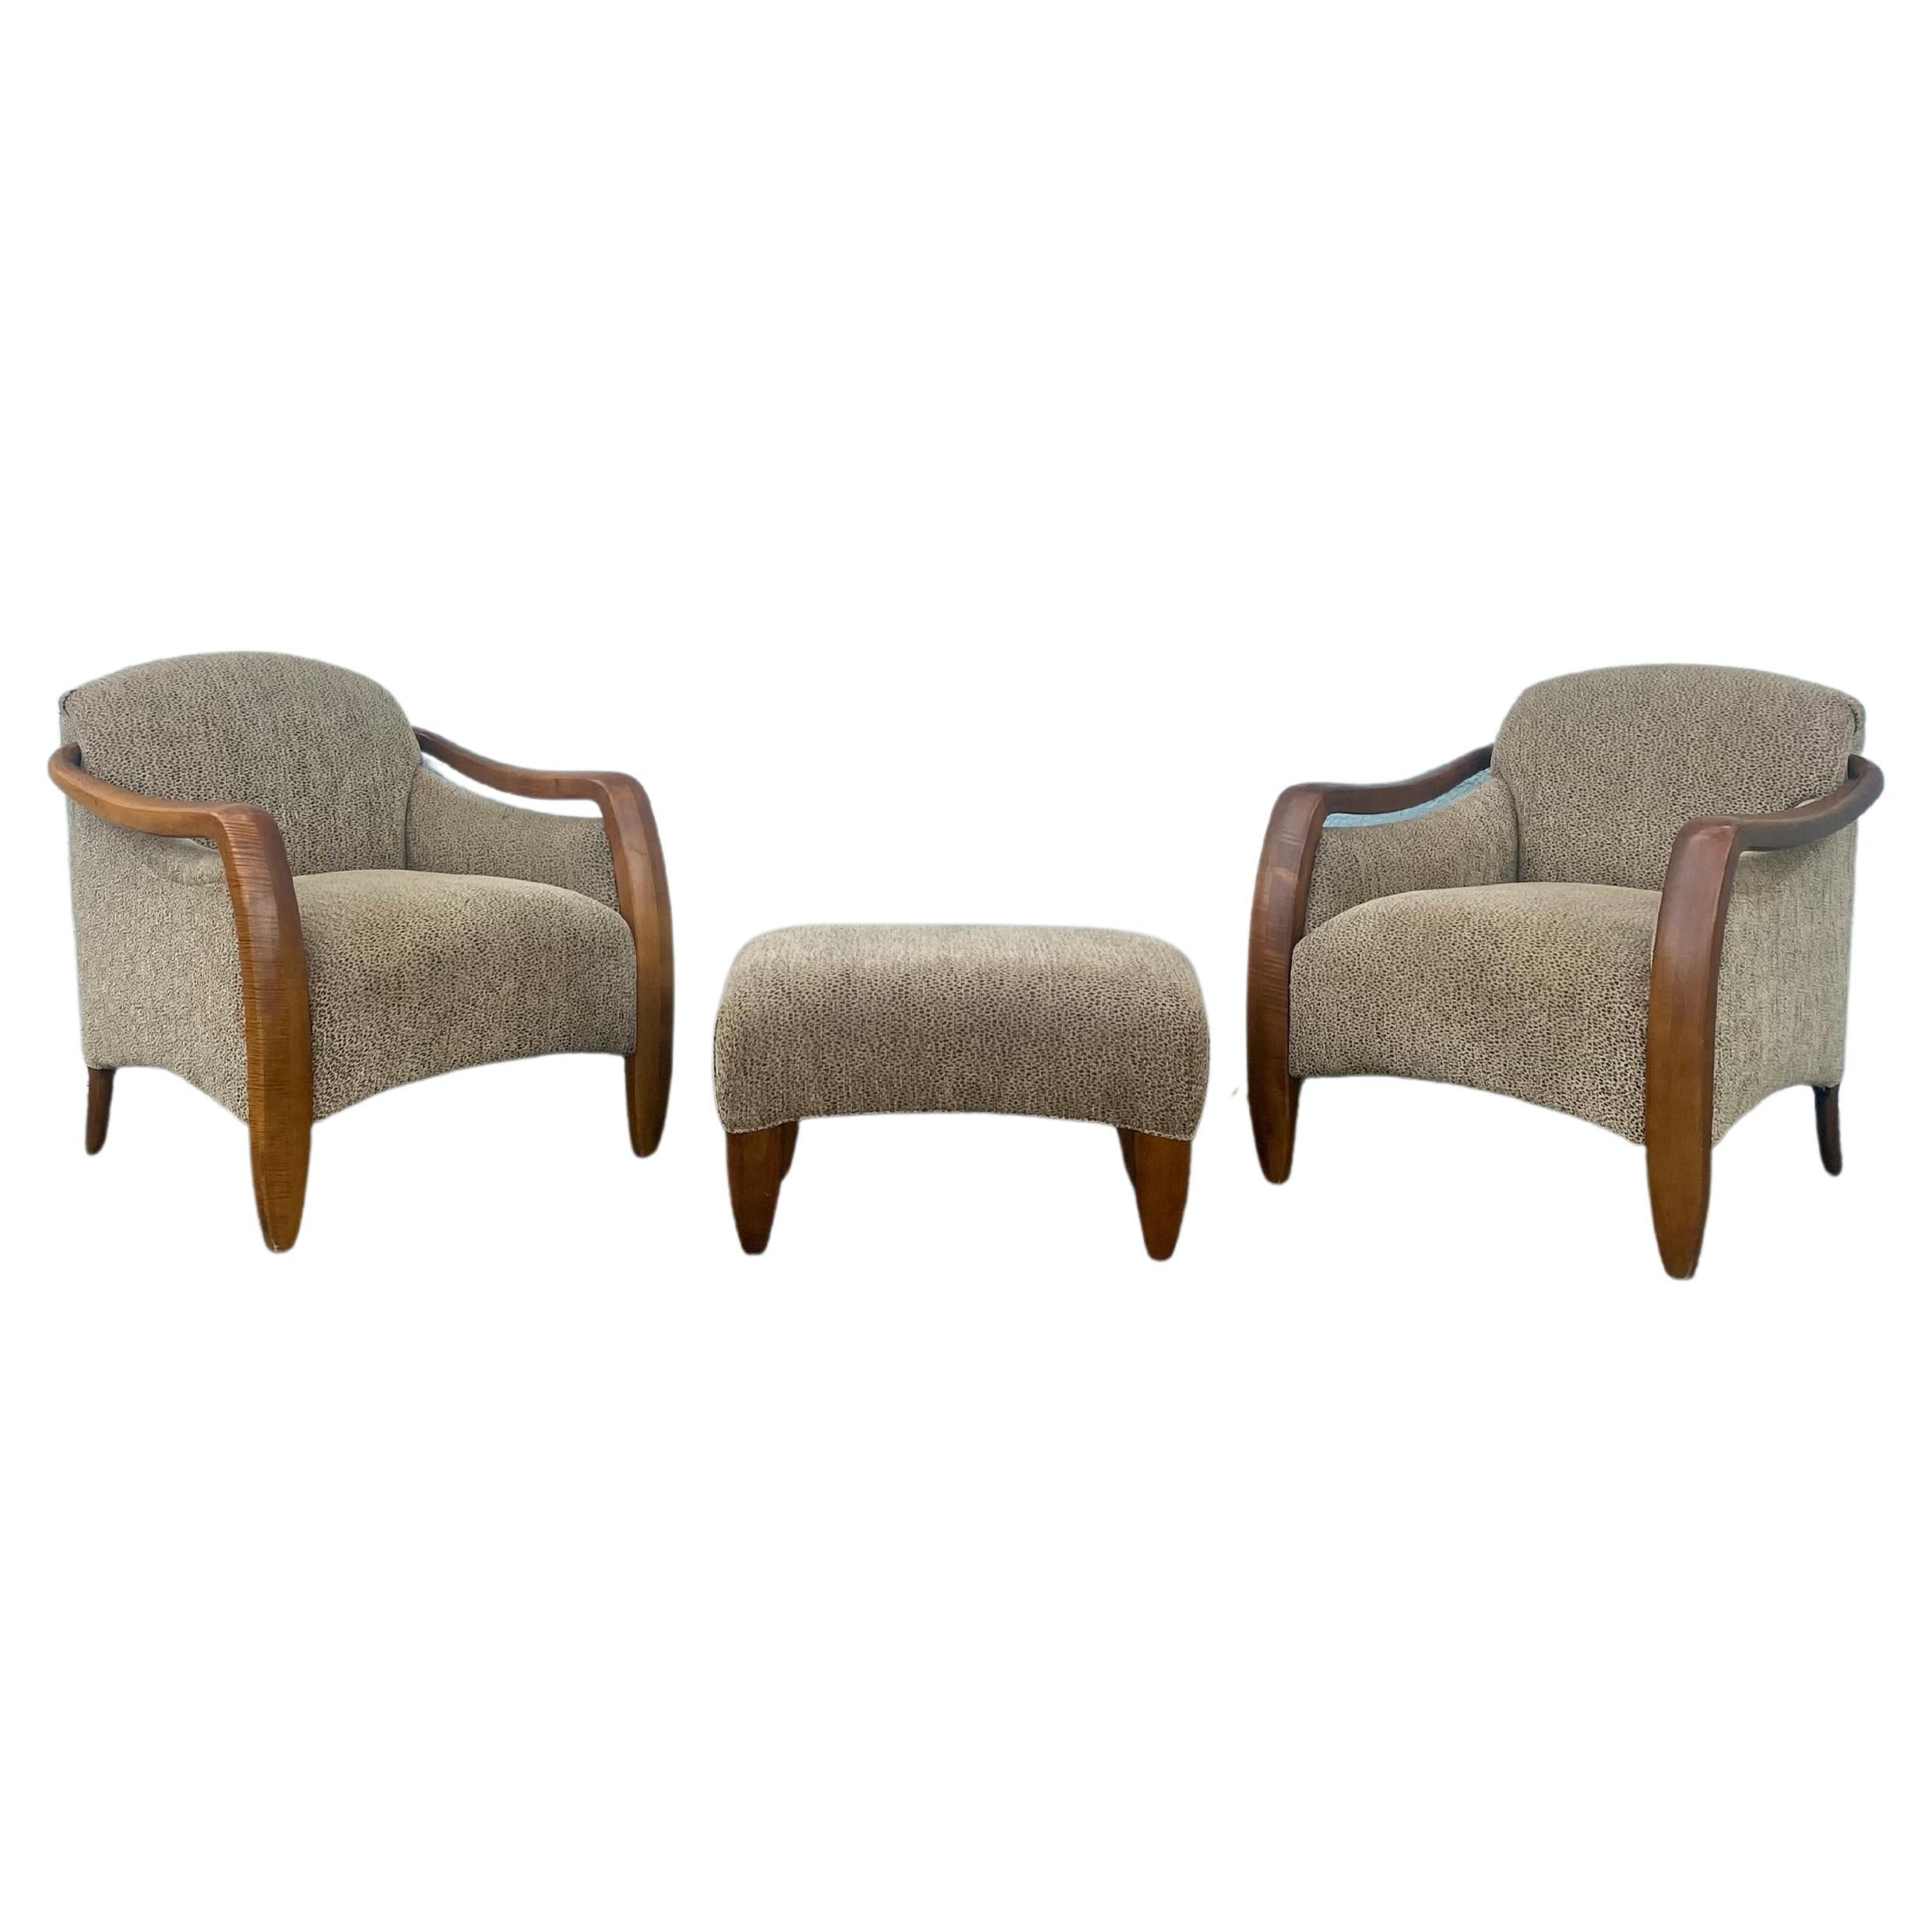 1980s Sculptural Leopard Tiger Wood Chairs and Ottoman, Set of 3 For Sale